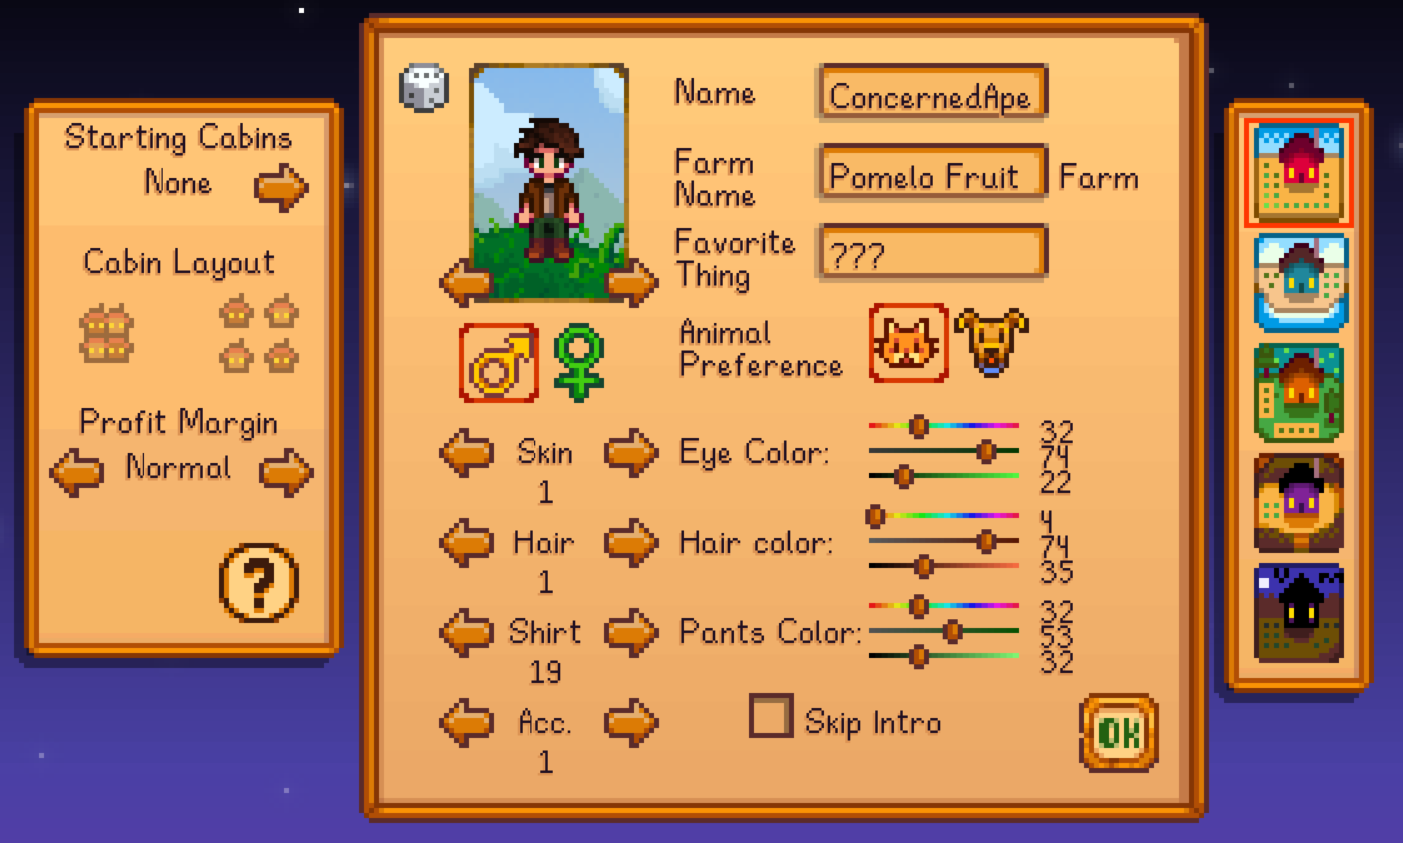 Stardew Valley 1.3 Content Update : An Unofficial Game Guide for Nintendo  Switch, PS4, Xbox One, and PC